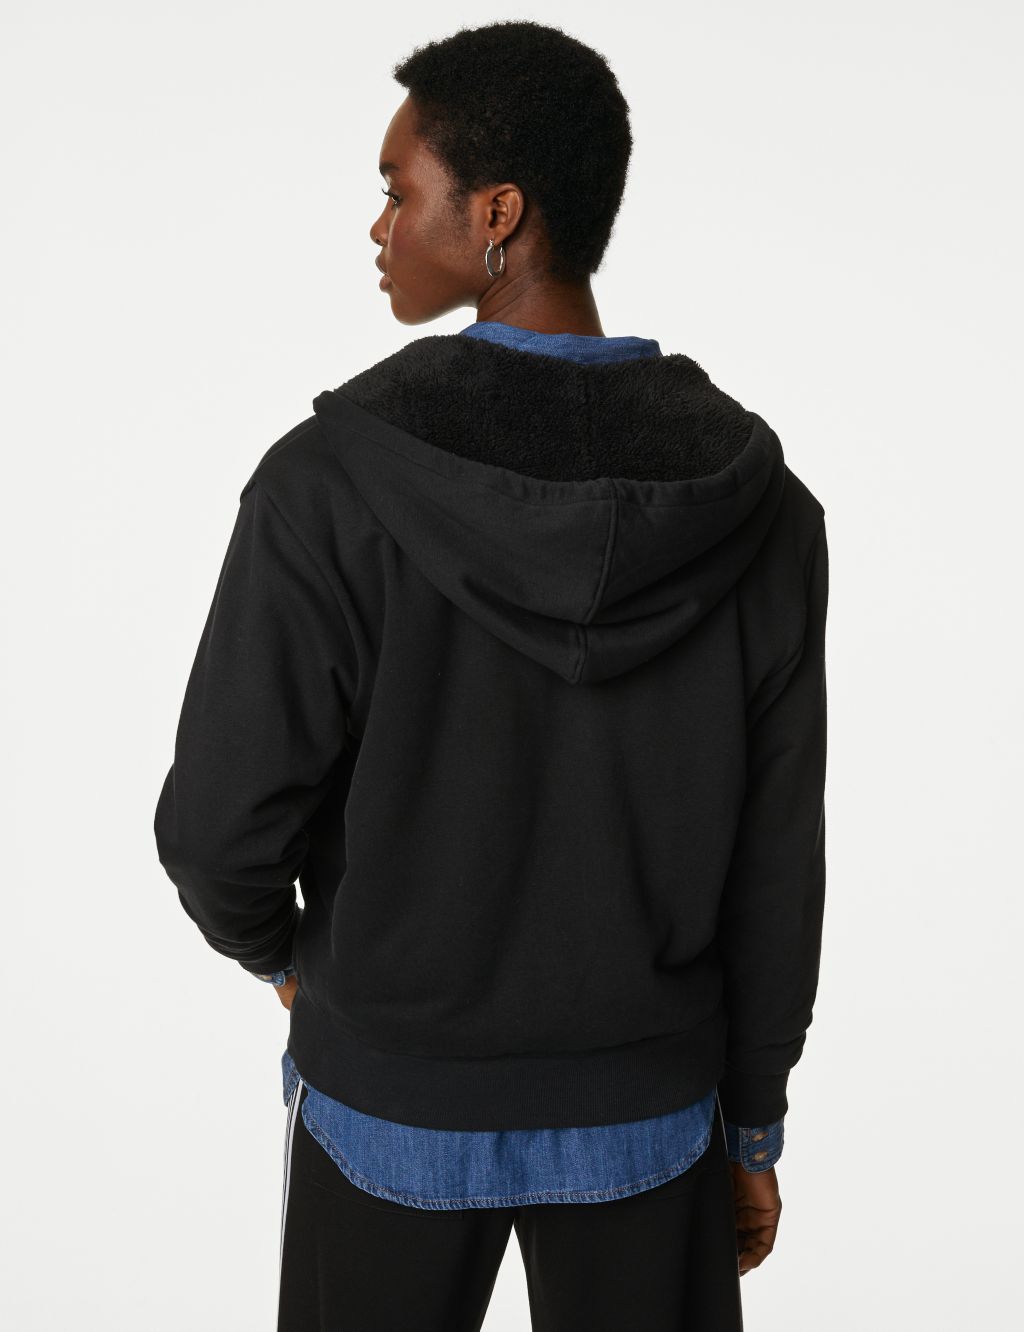 Cotton Rich Borg Lined Zip Up Hoodie image 6